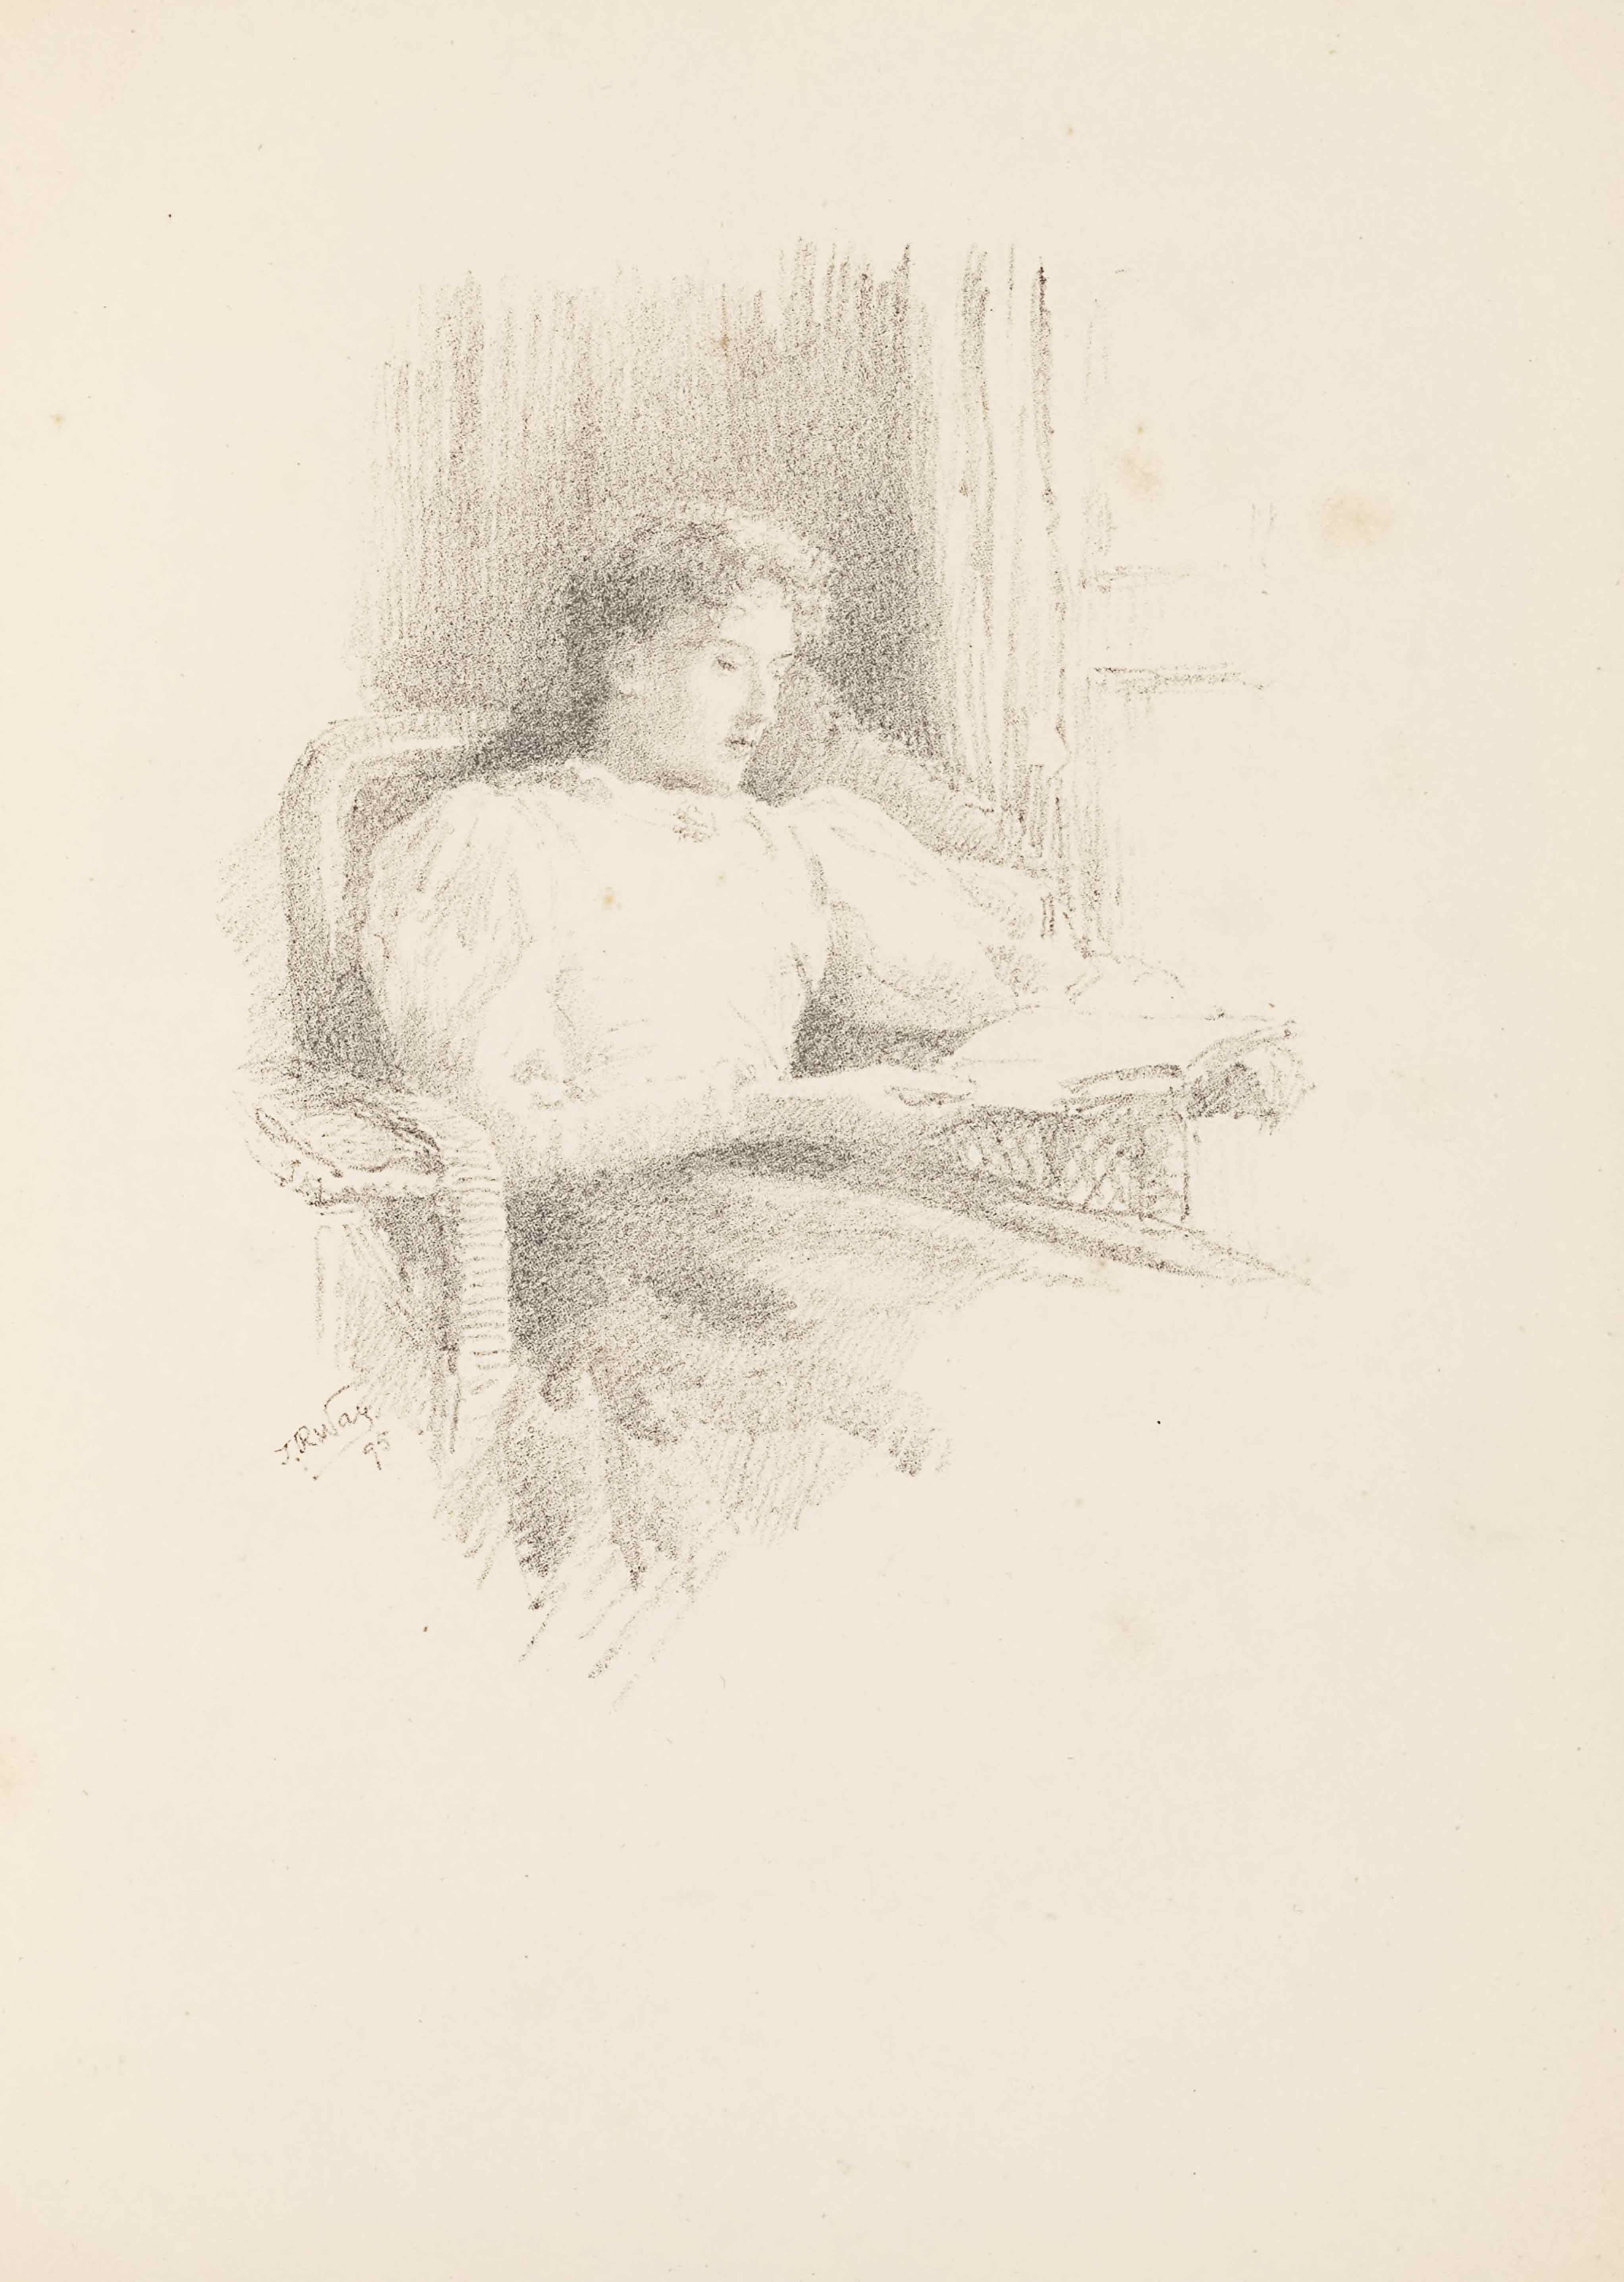 The unbordered lithograph by T R Way is in portrait orientation. The image shows the torso of a woman sitting in a wicker chair reading a book. The image is sketched lightly and the woman’s legs and surrounding area are not visible. The woman is turned to face slightly to the right, where there is the suggestion of a window. The woman’s body is leaned back into the chair. She is wearing a dark skirt and a plain white shirt with long and puffy sleeves that tighten around the forearm. The shirt has a high neckline. Her face is tilted down to look at the book which rests upon the left chair arm. Her right arm reaches across her body to support the book and her left arm is extended out below the book holding that side of it up. Her hair is wavy and tied back at the nape of her neck. Her eyes are hardly visible because her eyelids are mostly closed. Behind where she sits in the chair is a section of black shading to indicate a wall in the room. There are light outlines of a paned window in the background and top right of the page. The artist’s signature appears just to the left of the chair seat: “T. R. Way.” and in the below is the date: “95.”